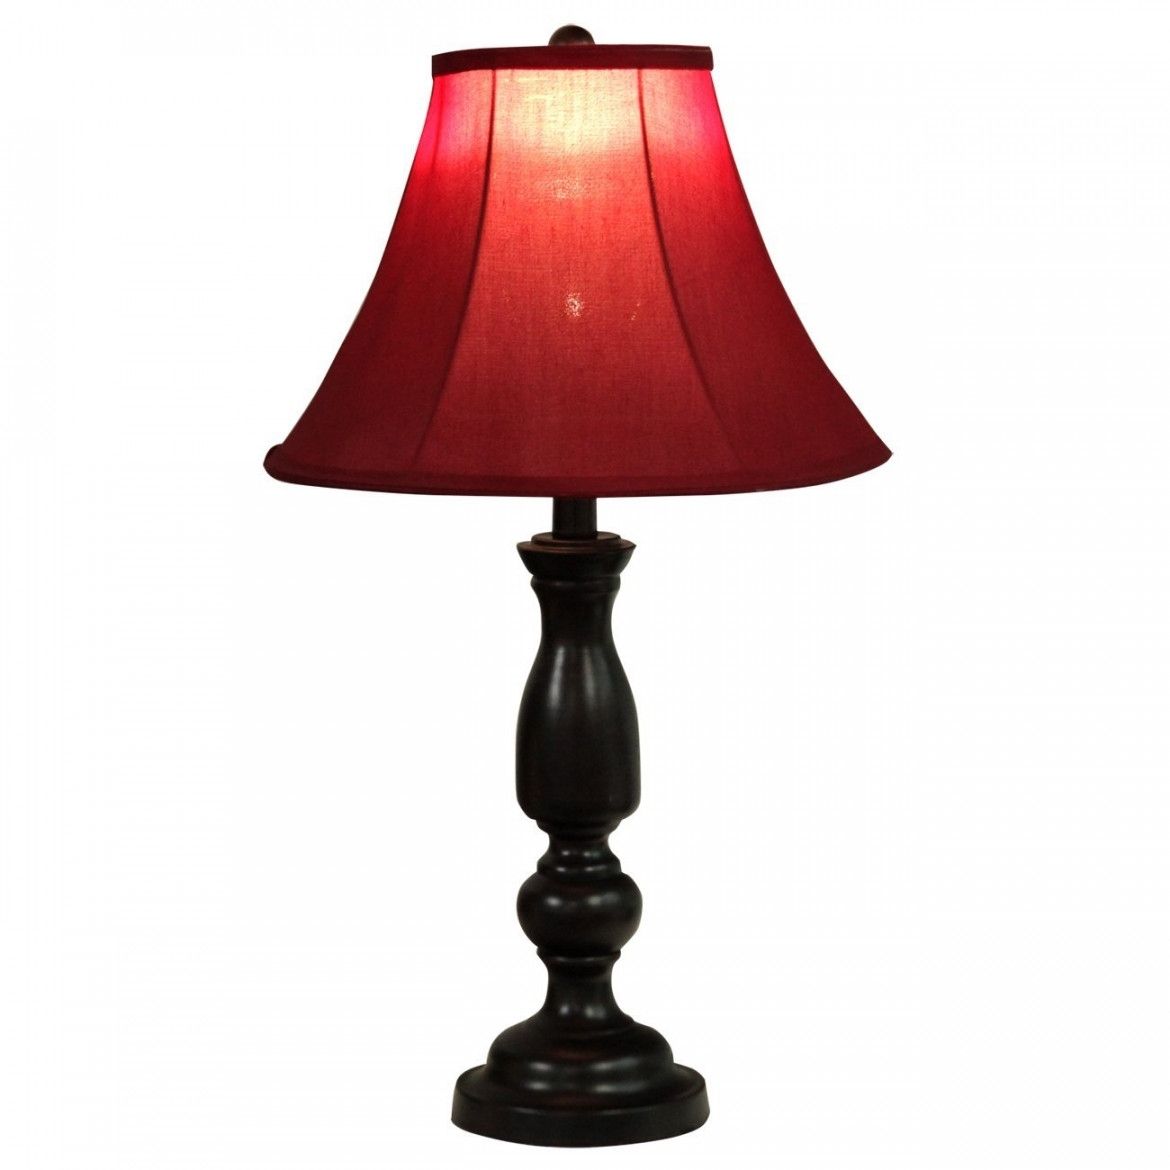 Vintage Red Table Lamp For Living Room Traditional Table Lamp With Pertaining To Traditional Table Lamps For Living Room (Photo 2 of 15)